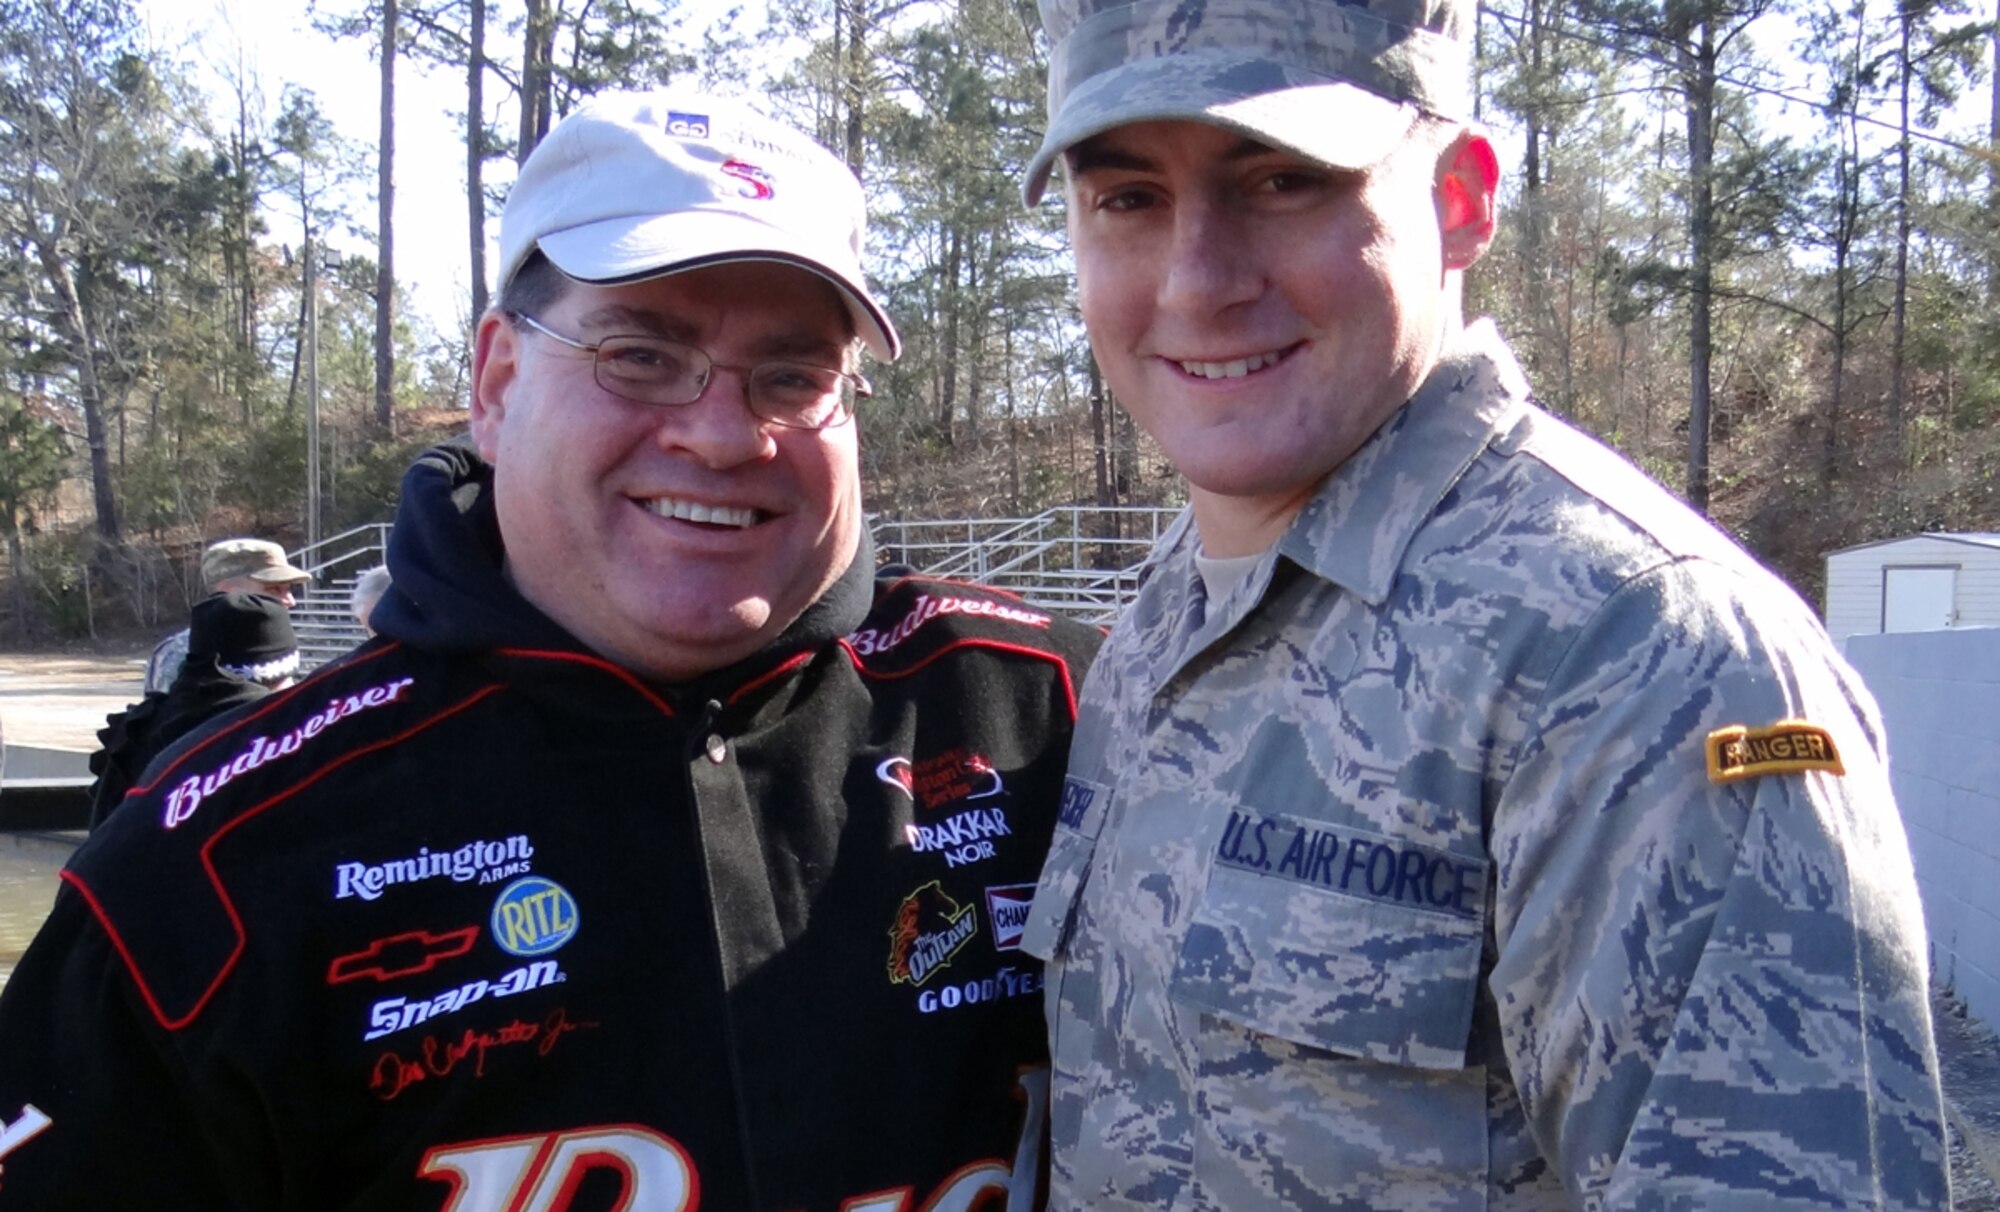 Senior Airman Stephen Becker, a native of Minerva, Ohio, right, poses for a photograph with his father Mike Becker, a former Army Green Beret, Jan. 24, 2014, after graduating from the U.S. Army Ranger School at Ft. Benning, Ga.  Becker is the 257th Airman to graduate from the U.S. Army Ranger School at Ft. Benning, Ga. The purpose of the school is to develop combat skills of selected officers and enlisted men by requiring them to perform effectively as small unit leaders in a realistic tactical environment, under mental and physical stress approaching that found in actual combat. (Courtesy photo)